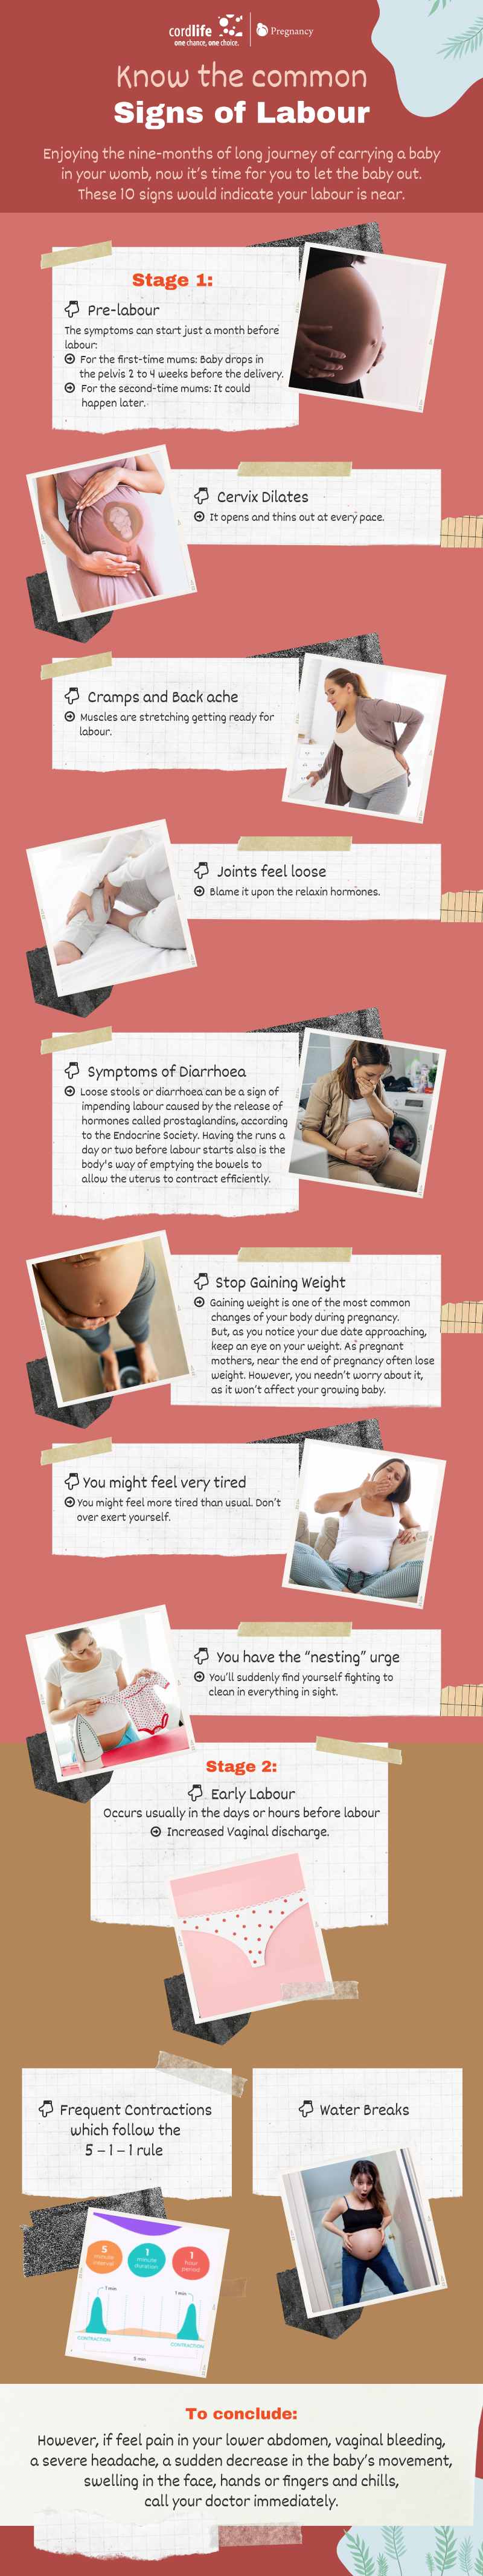 Know the Common Signs of Labour